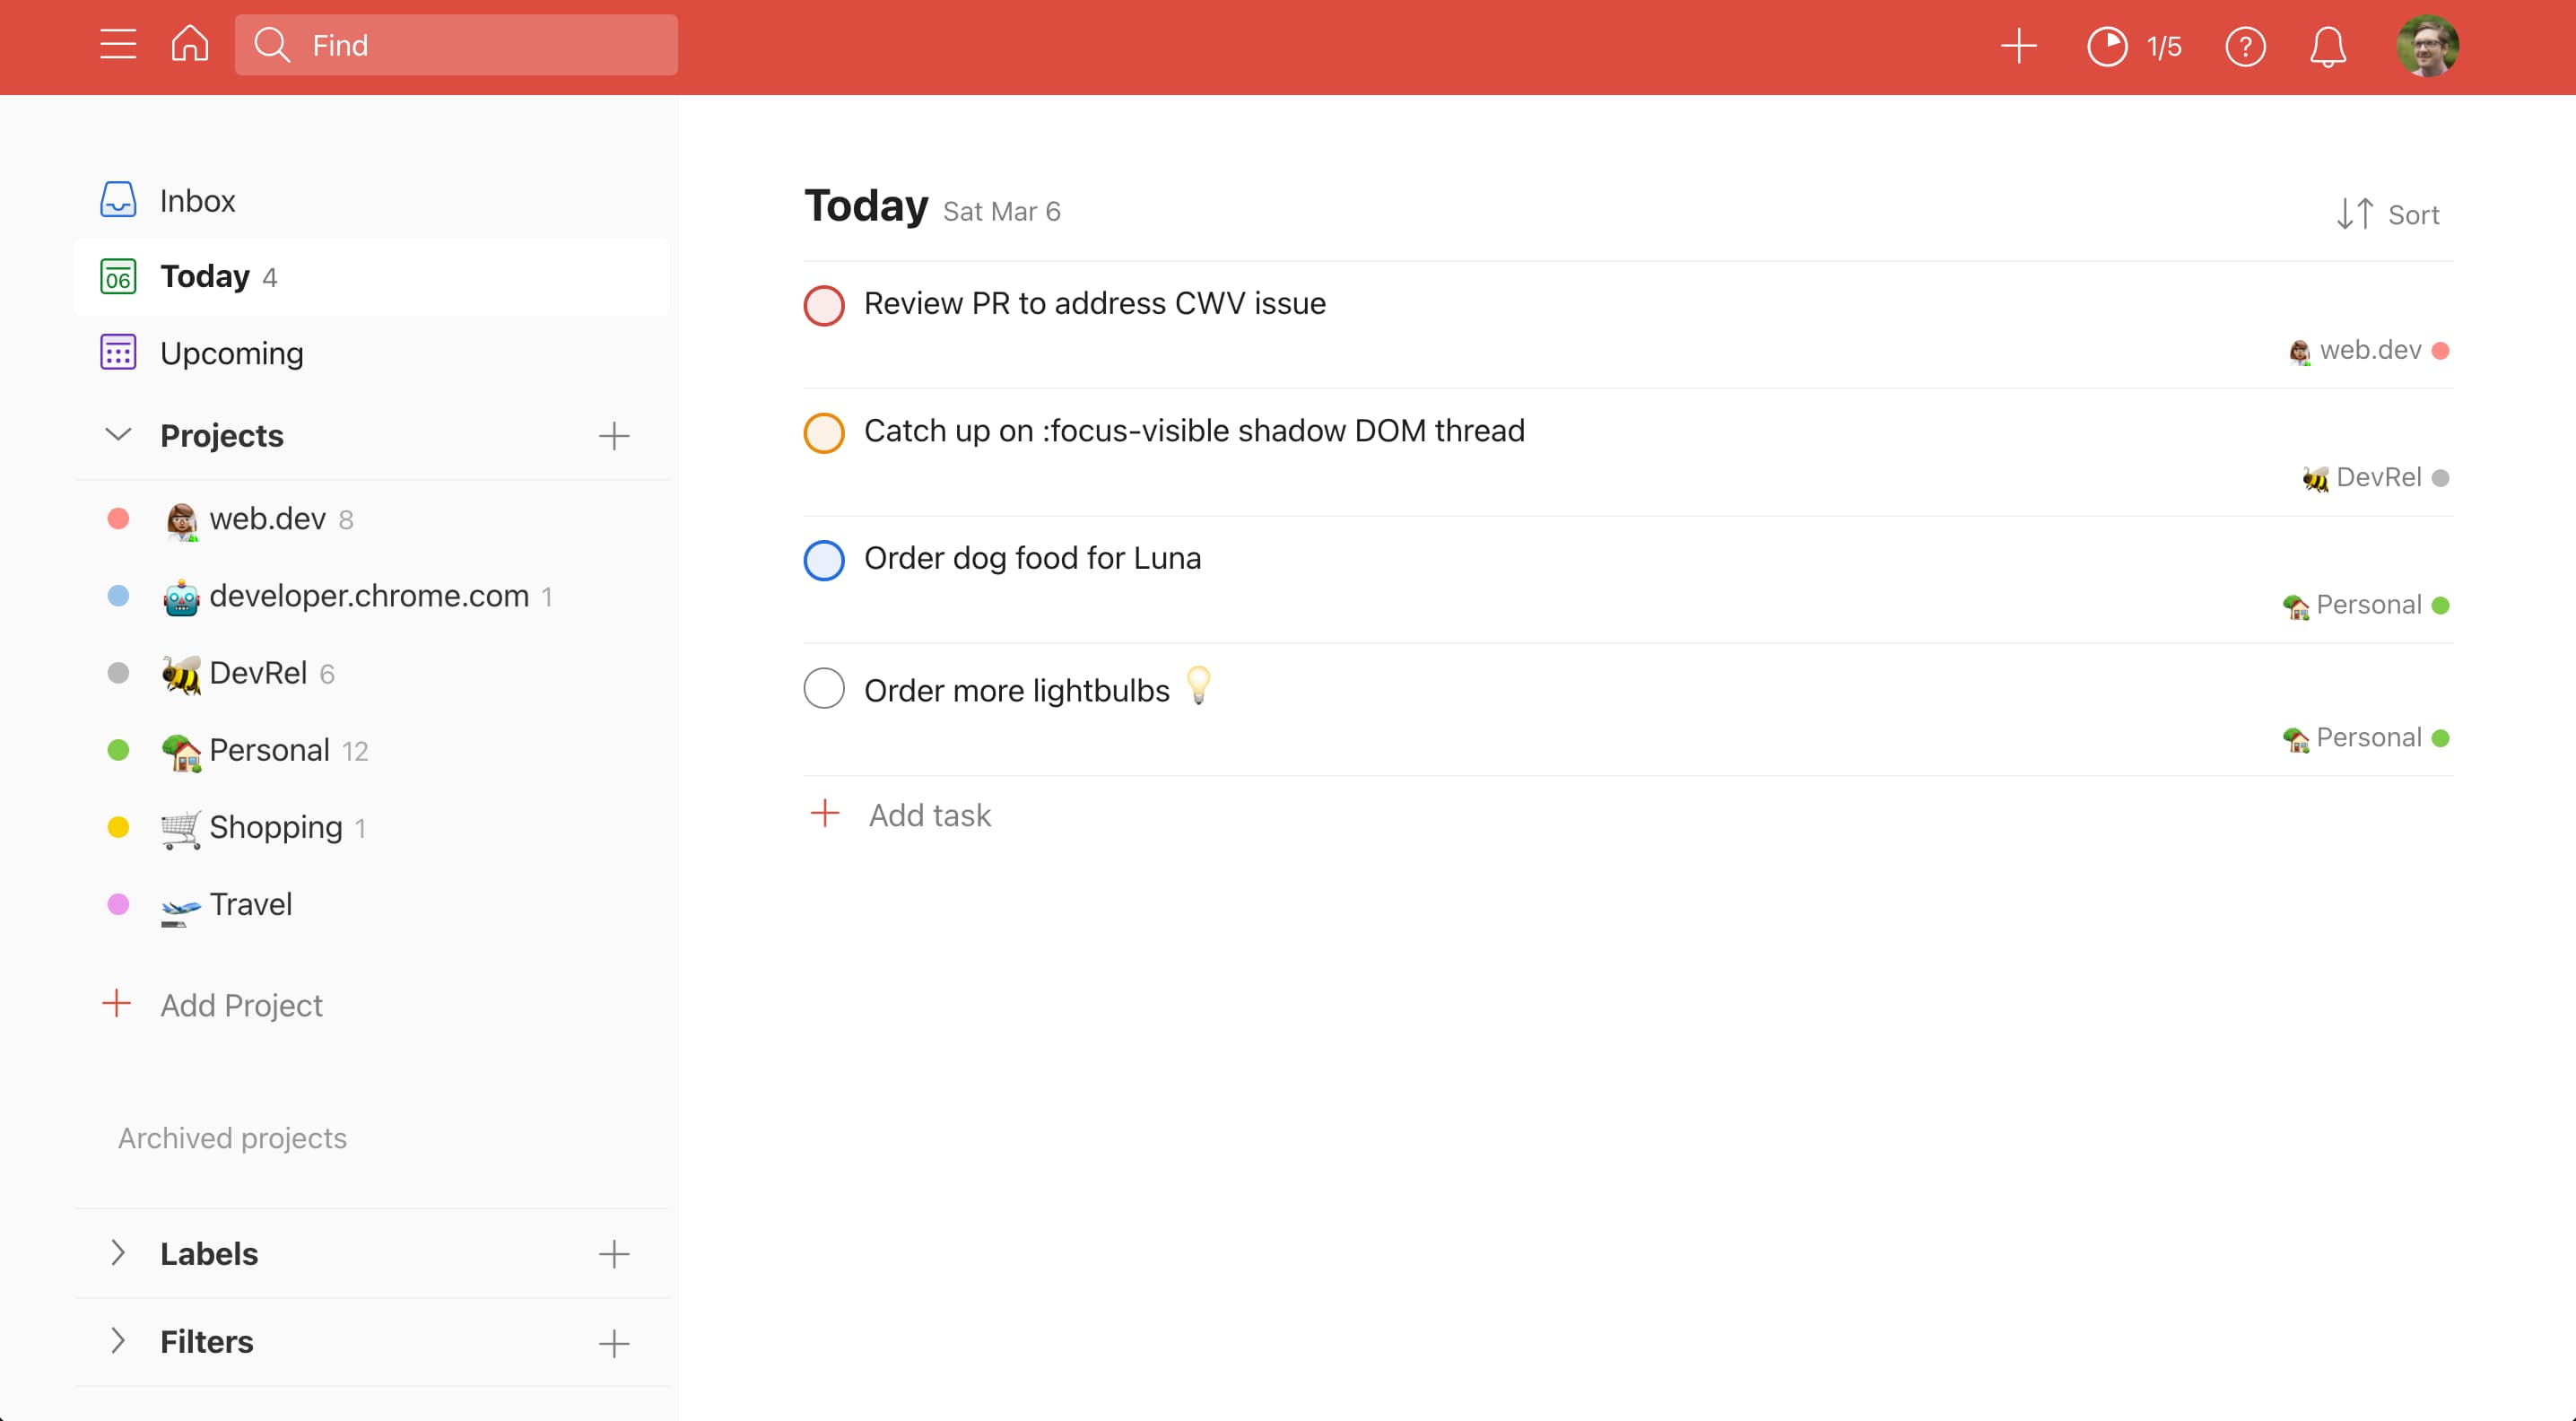 A todoist dashboard showing four tasks, color-coded by priority.